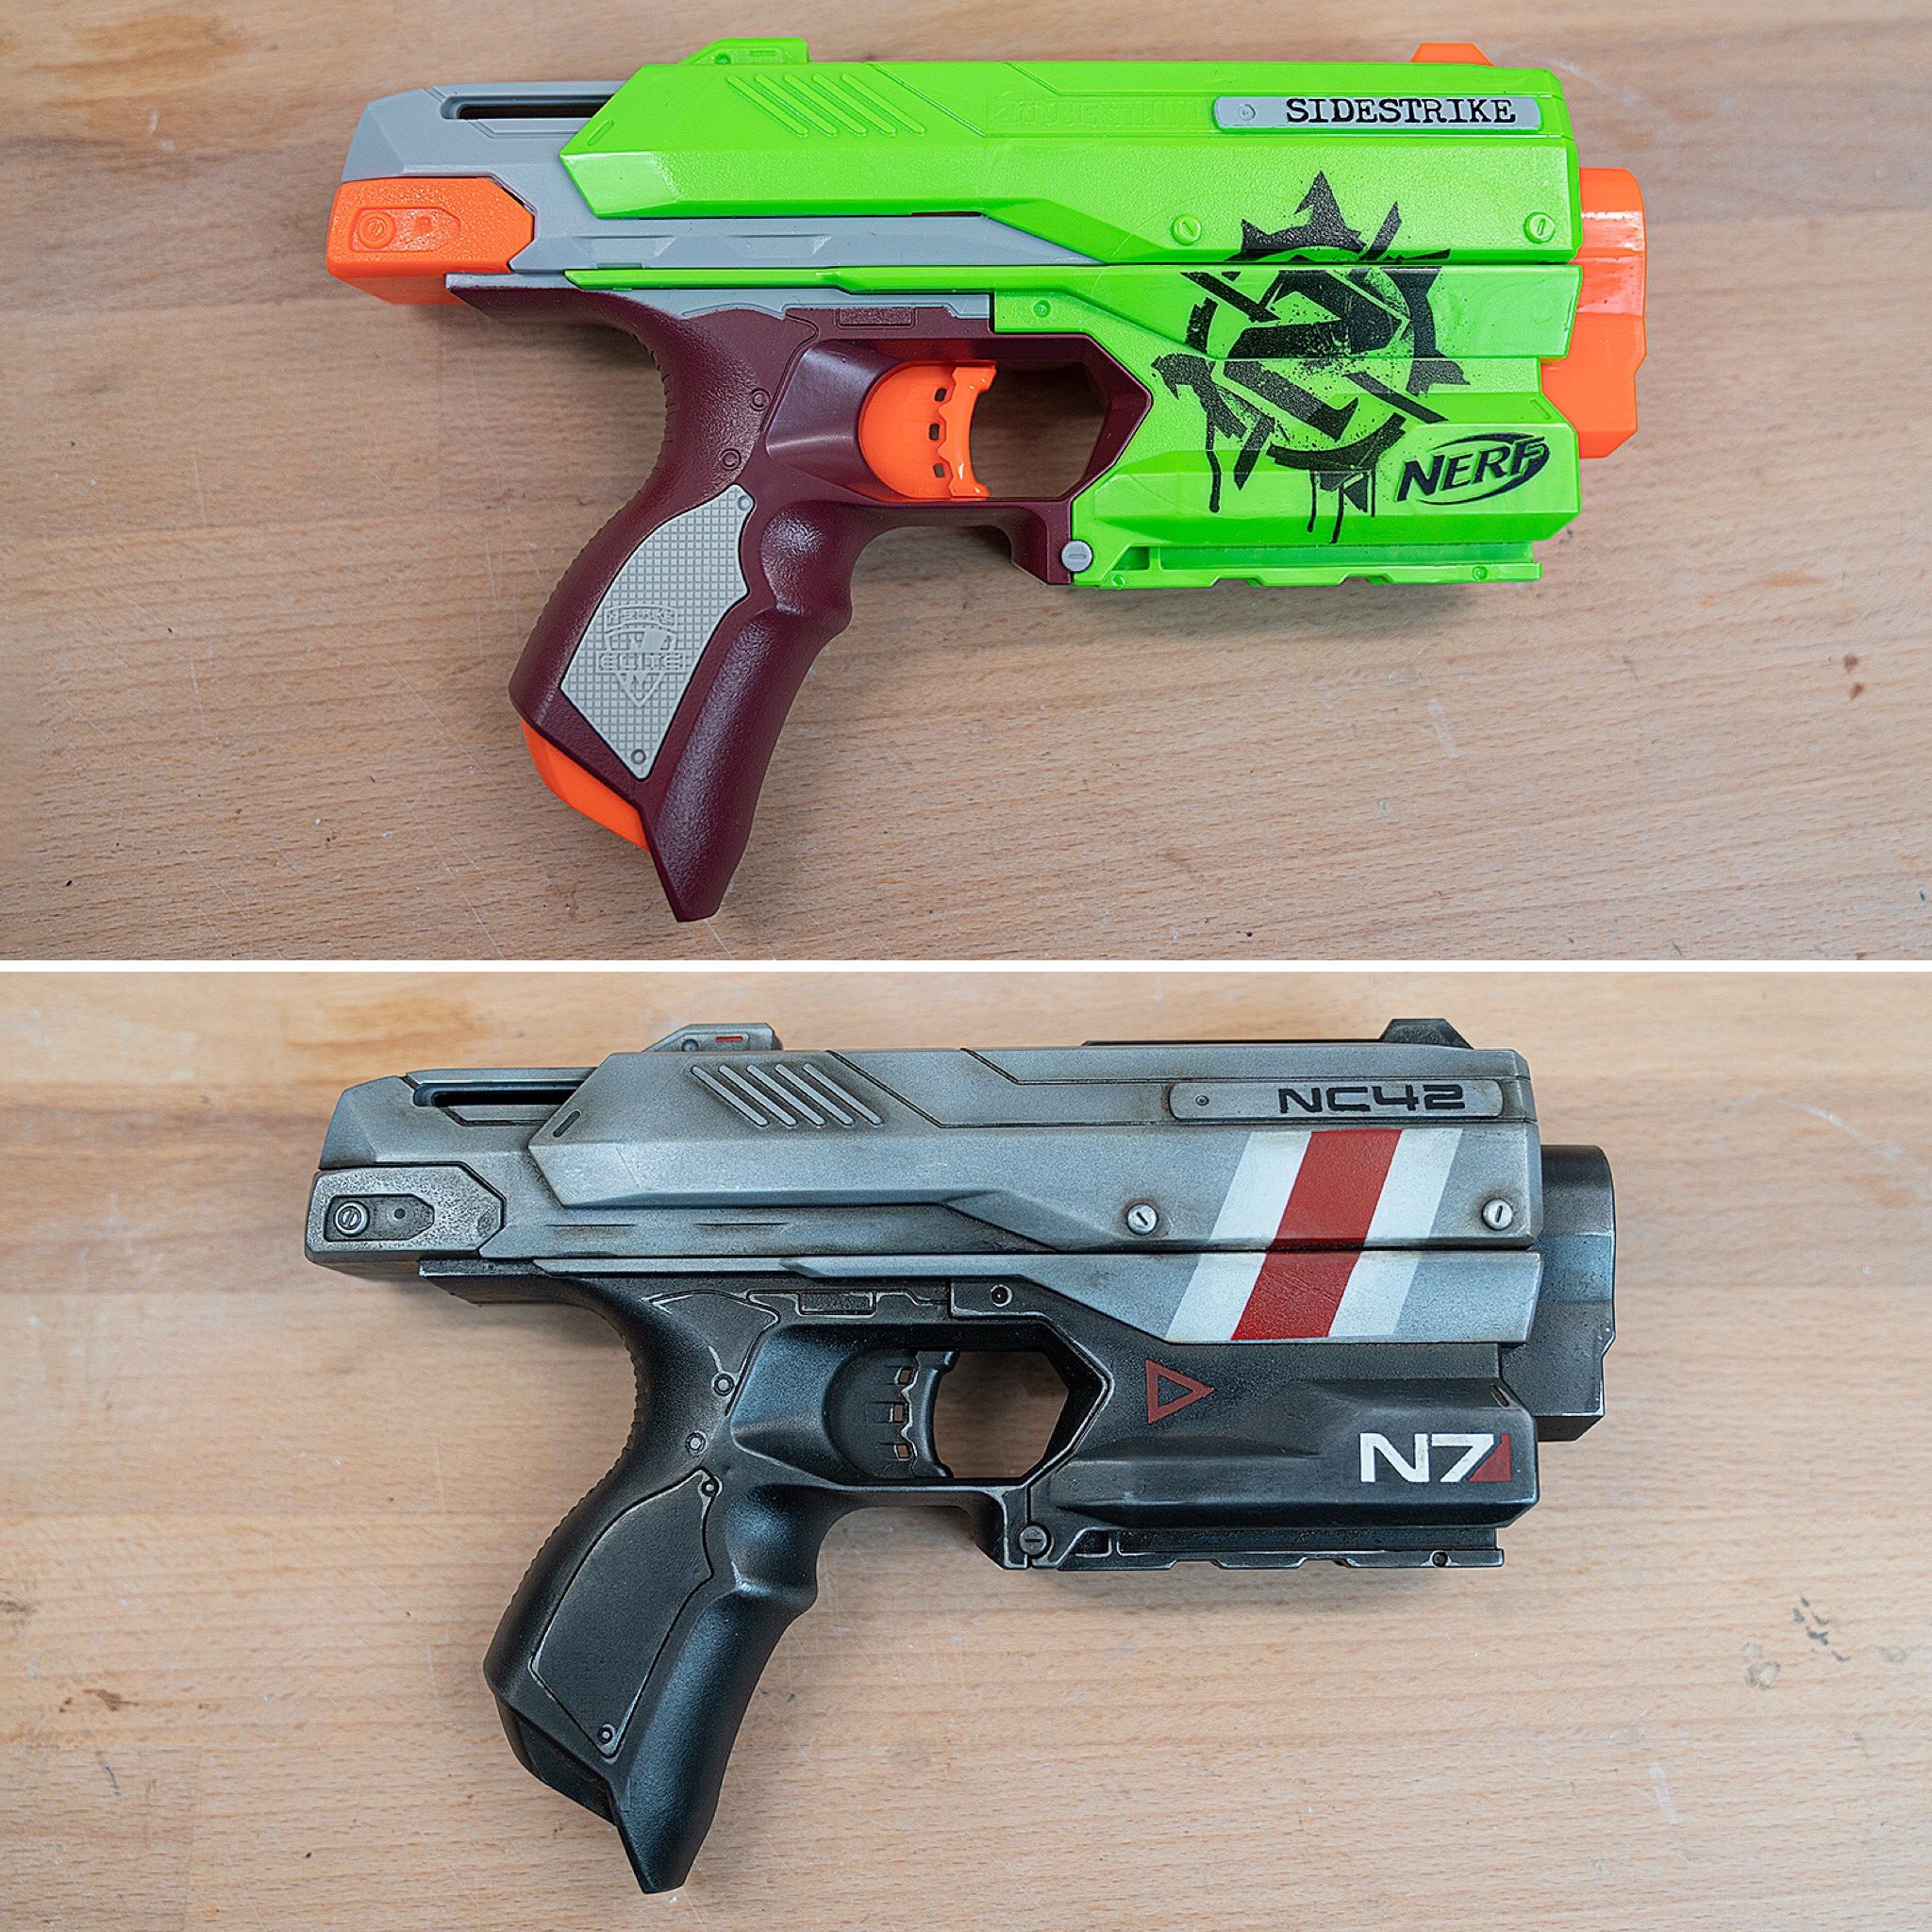 Kamui 📚 on Twitter: "Did you play Mass Effect? Which one was your favorite? Benni is to finish Nerf Gun painting tutorial video tomorrow. A lot of people have one